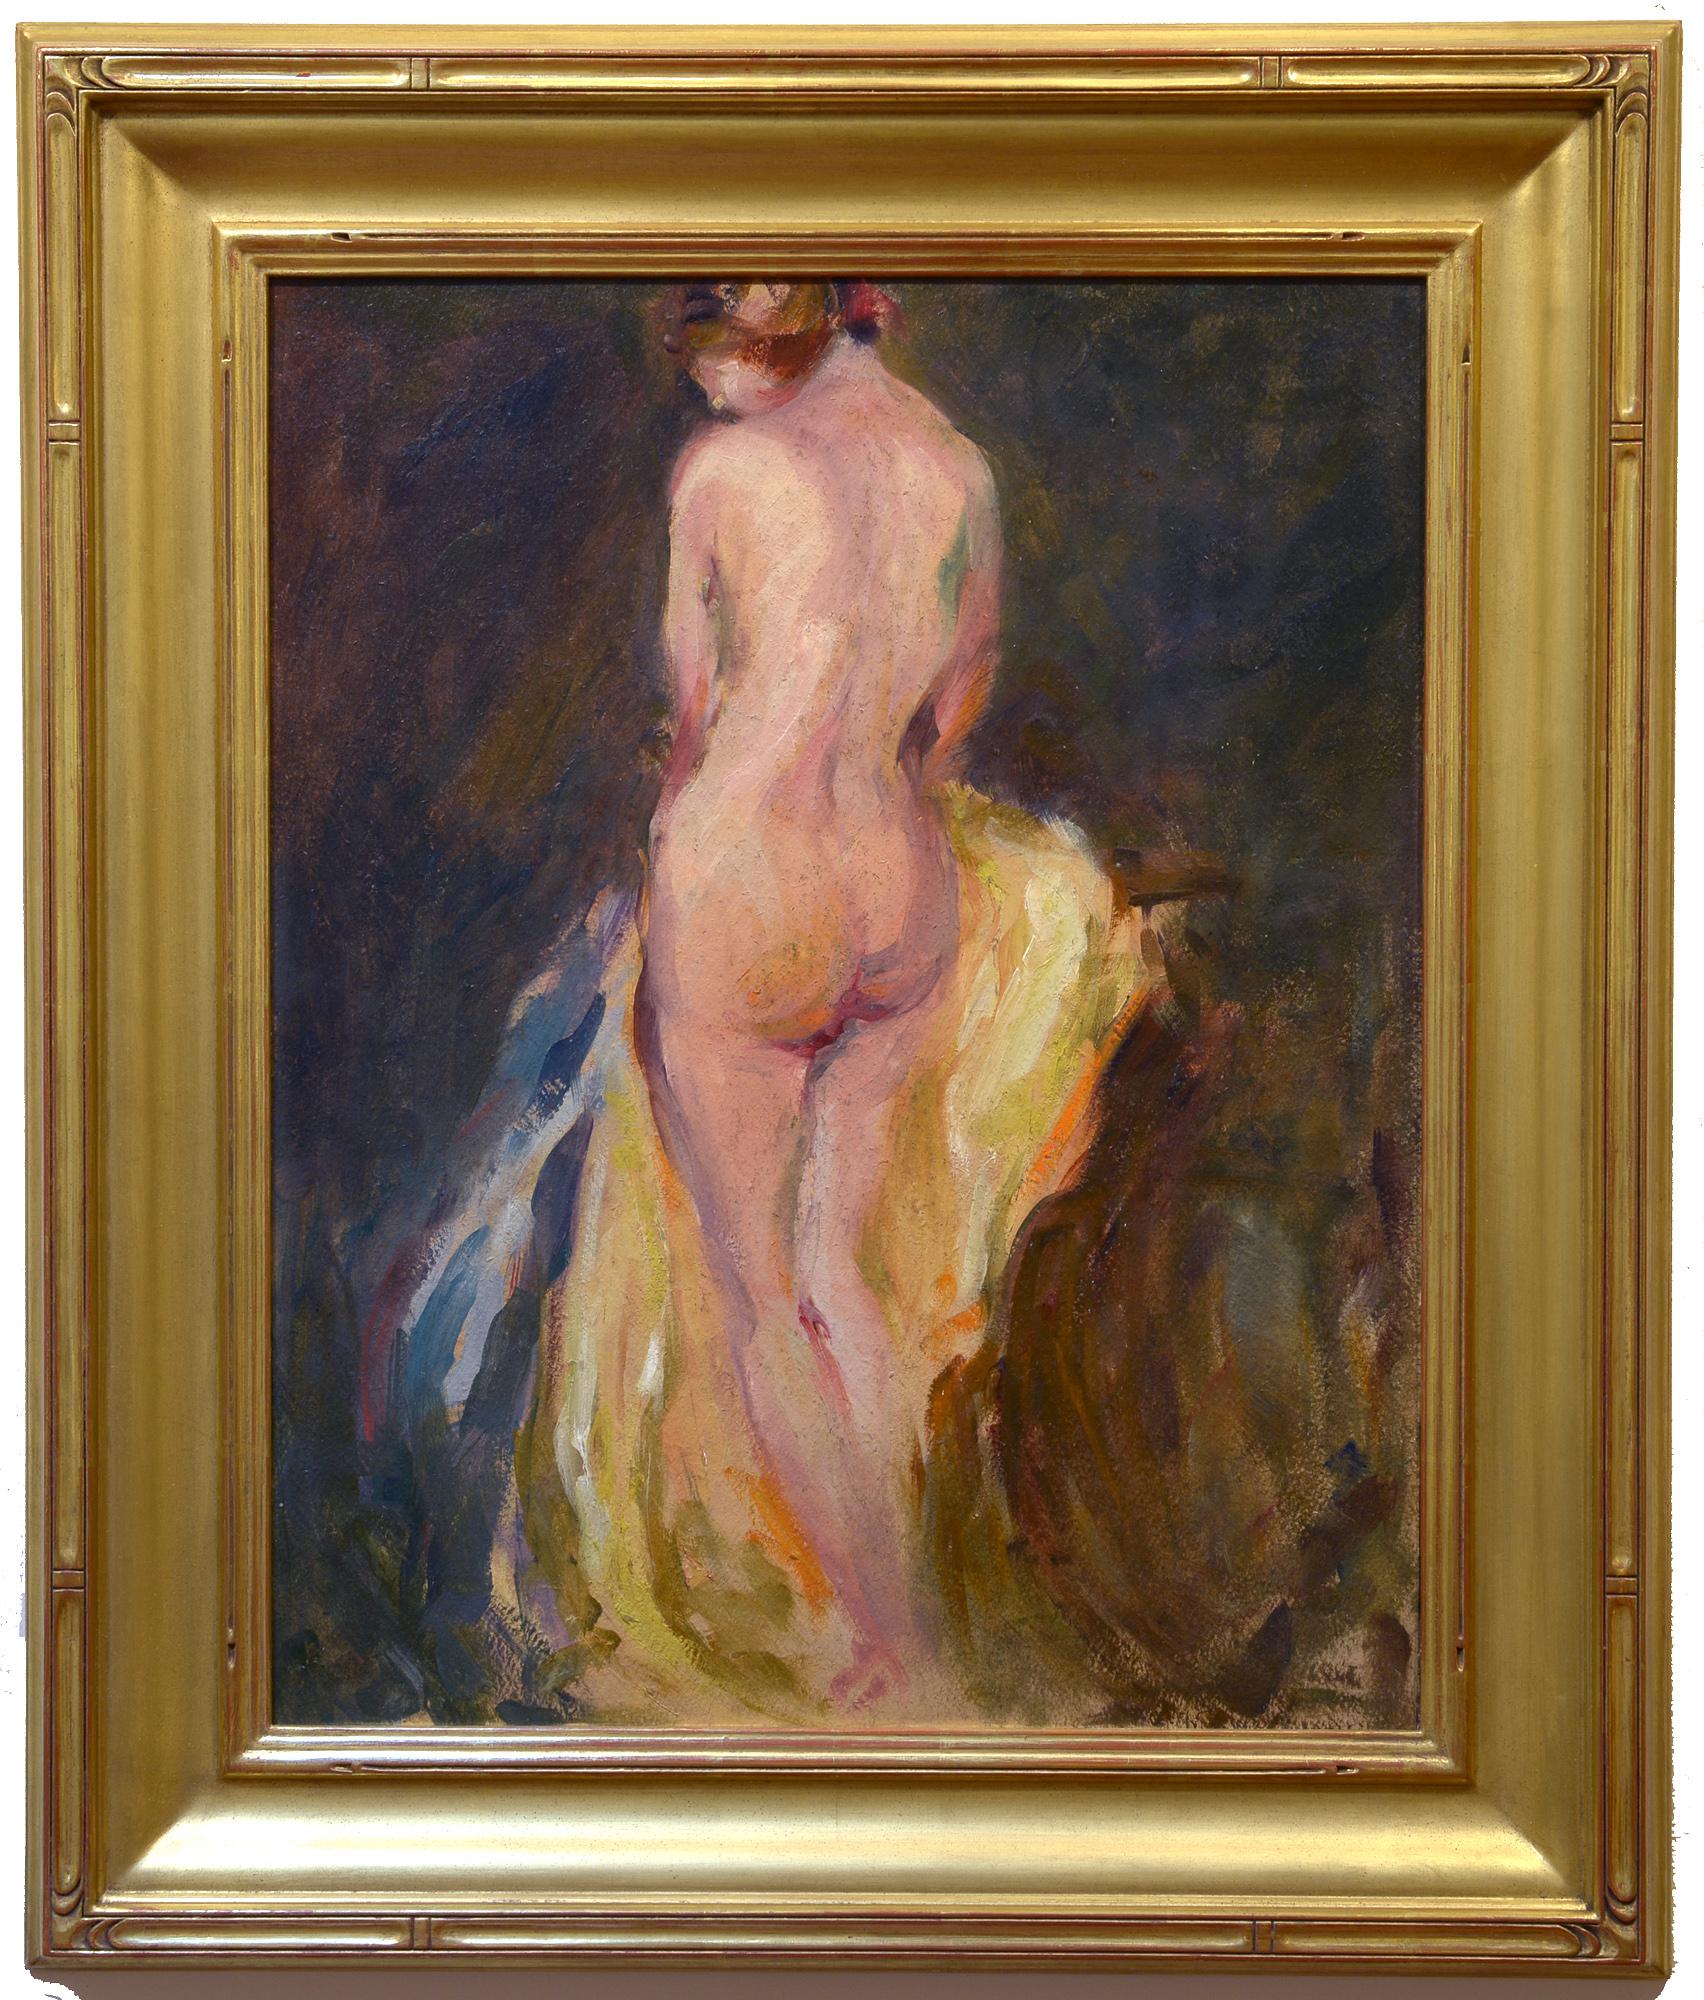 Spanish Gown, Standing Nude Figure, American Impressionist, 1920s, Oil on Board - Painting by Unknown